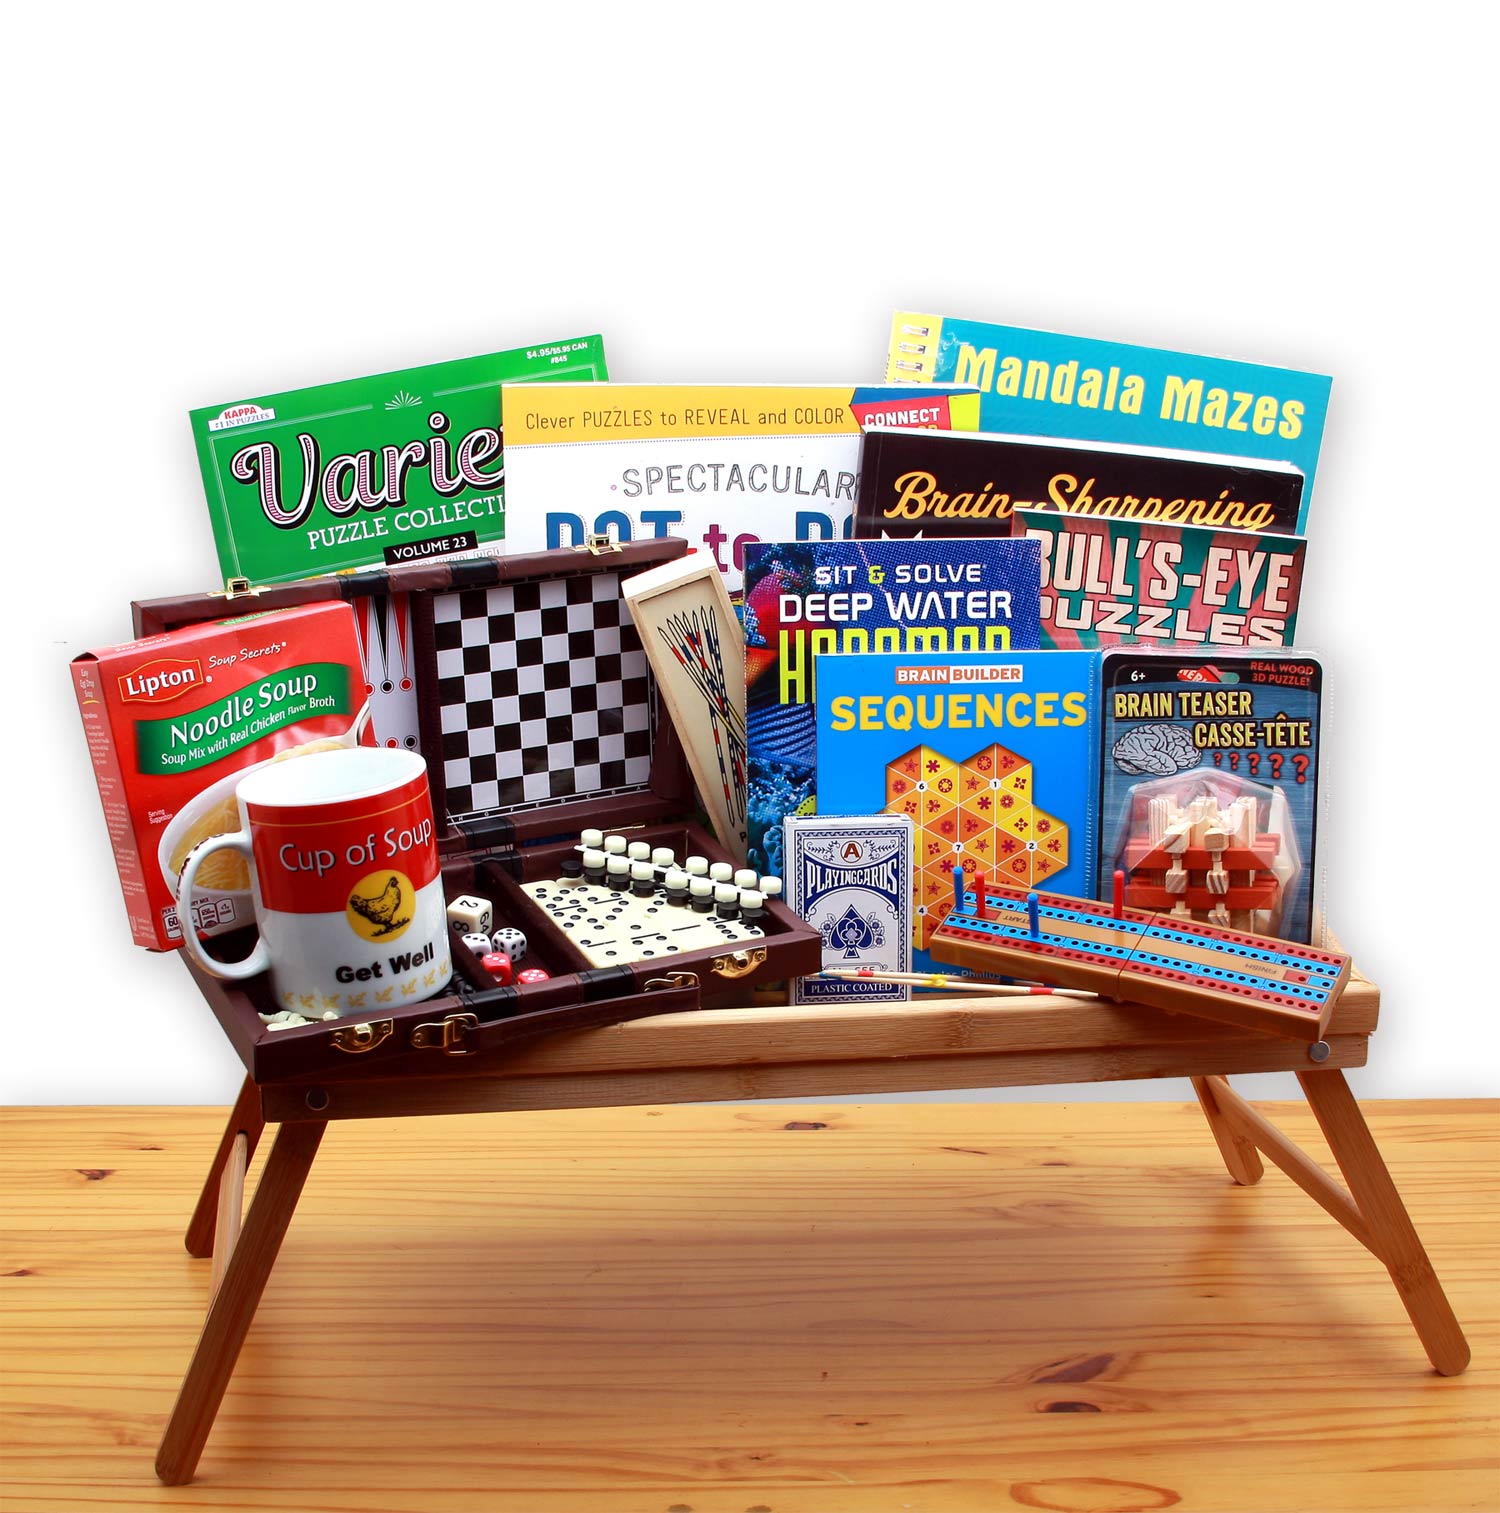 Rest & Recovery Get Well Activity Tray - get well soon basket - get well soon gifts for women - get well soon gifts for men